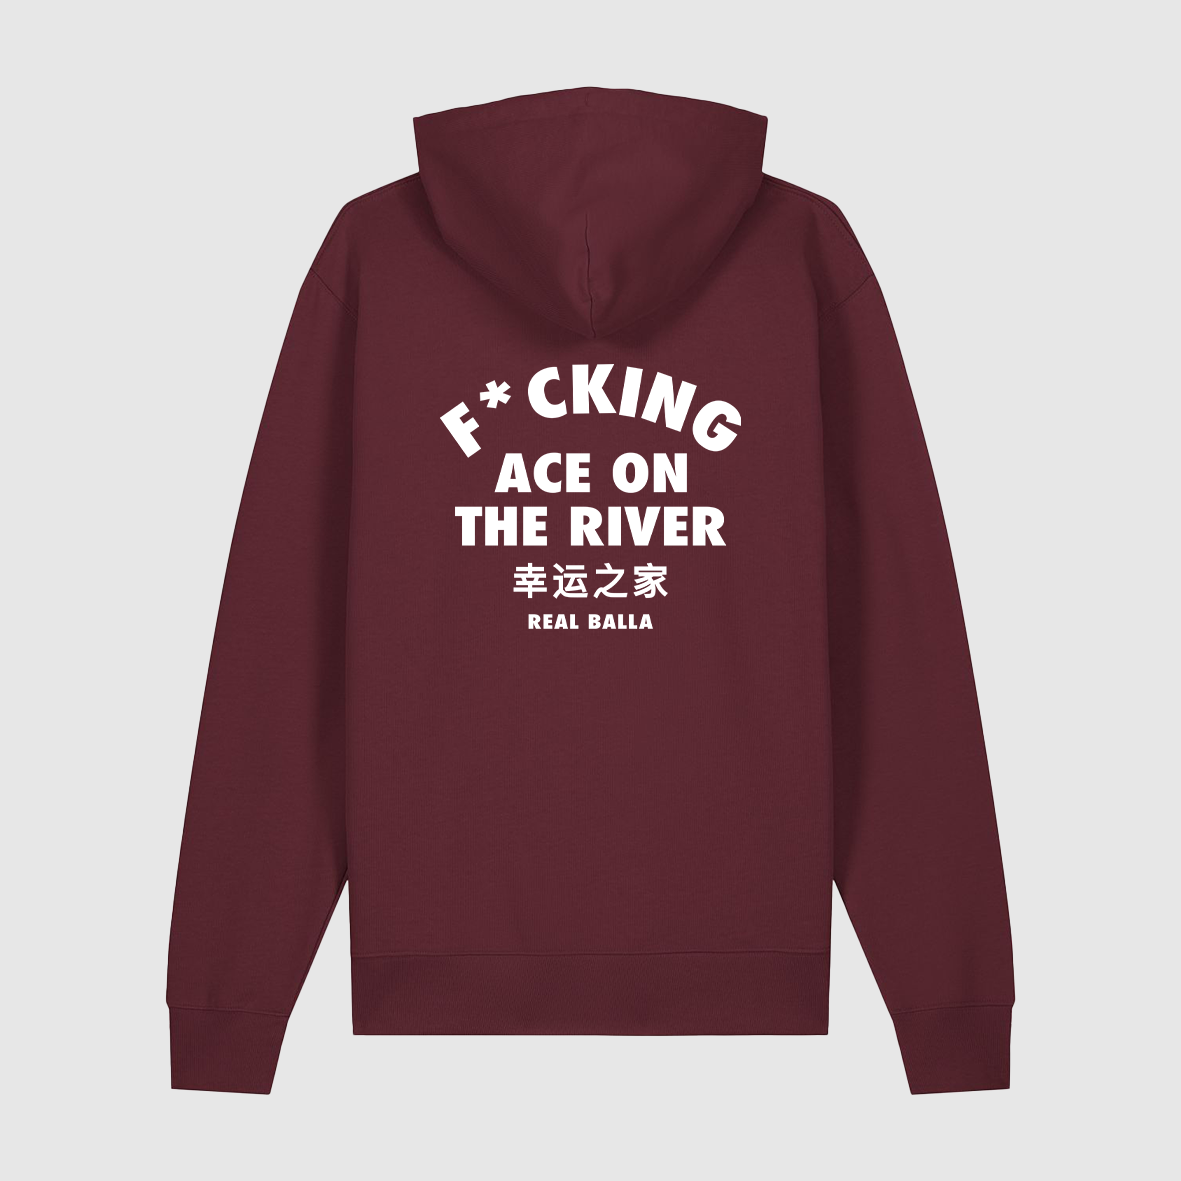 Hoodie F*cking ace on the river